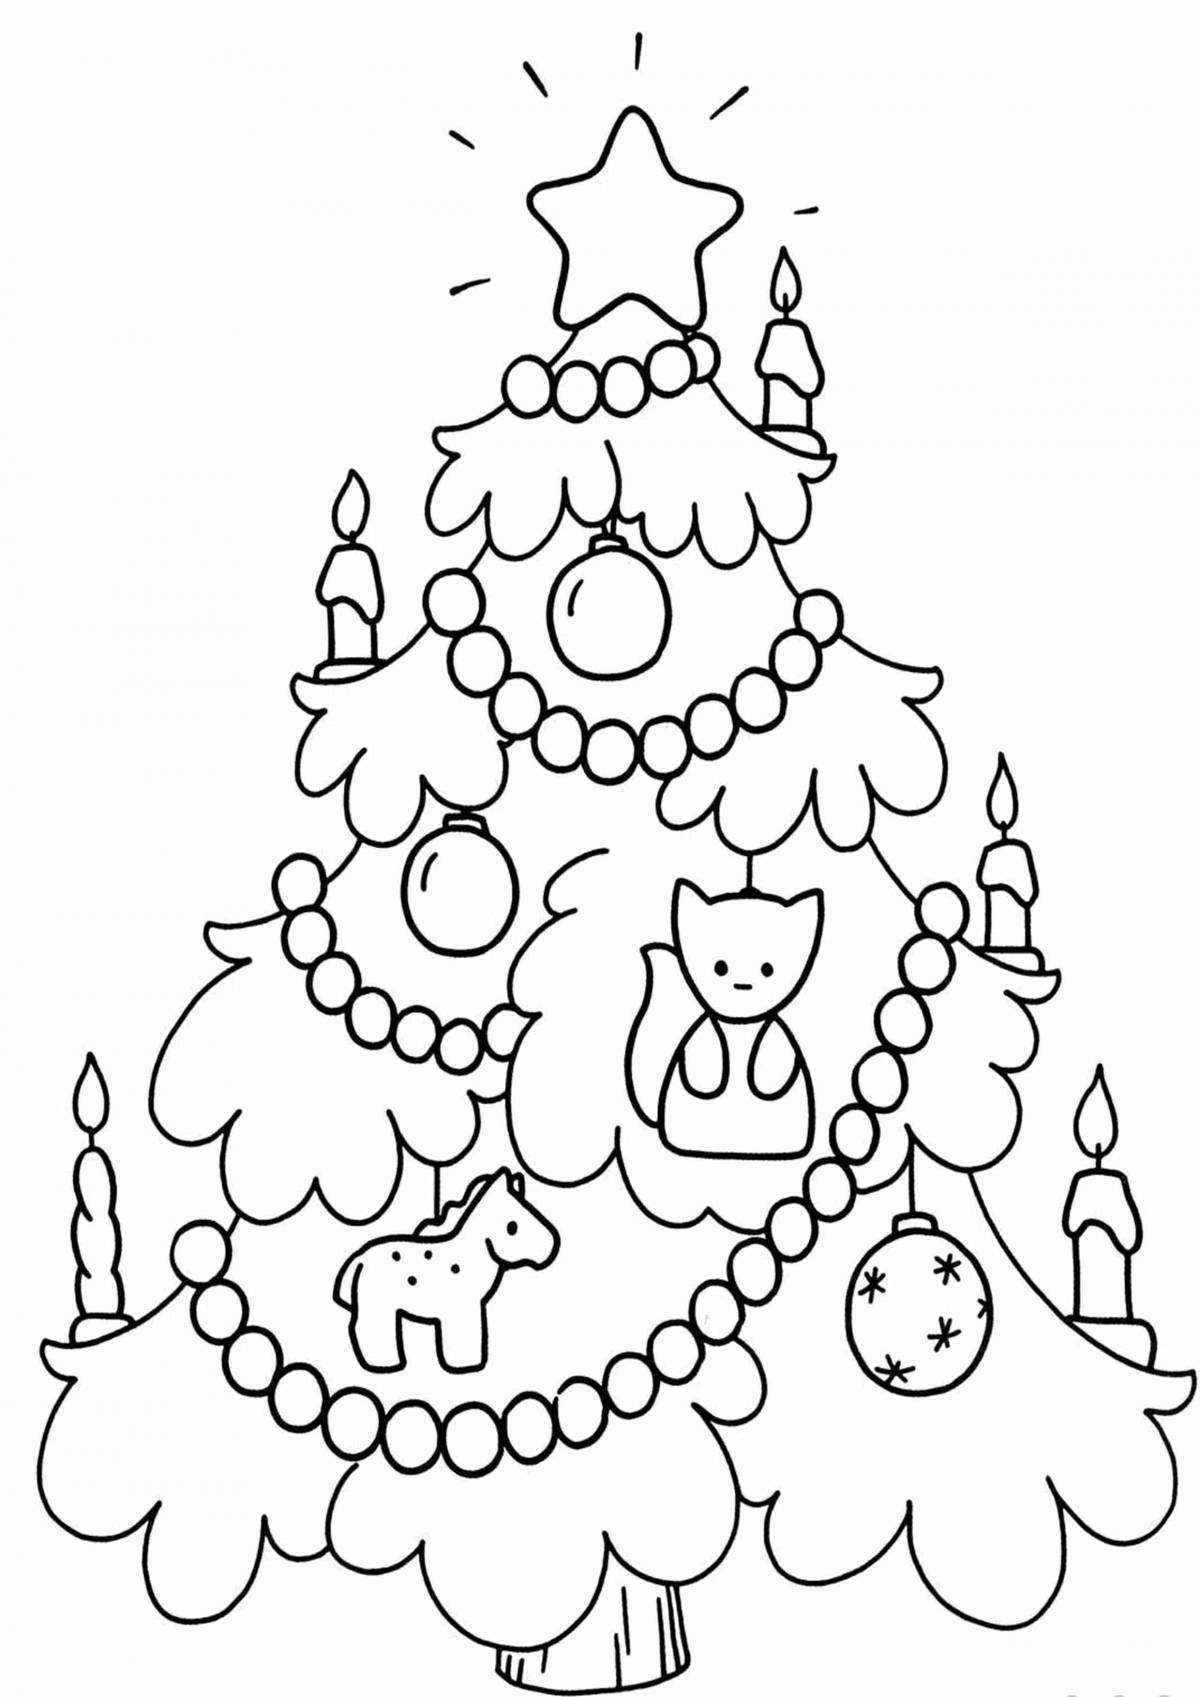 Bright Christmas tree coloring card